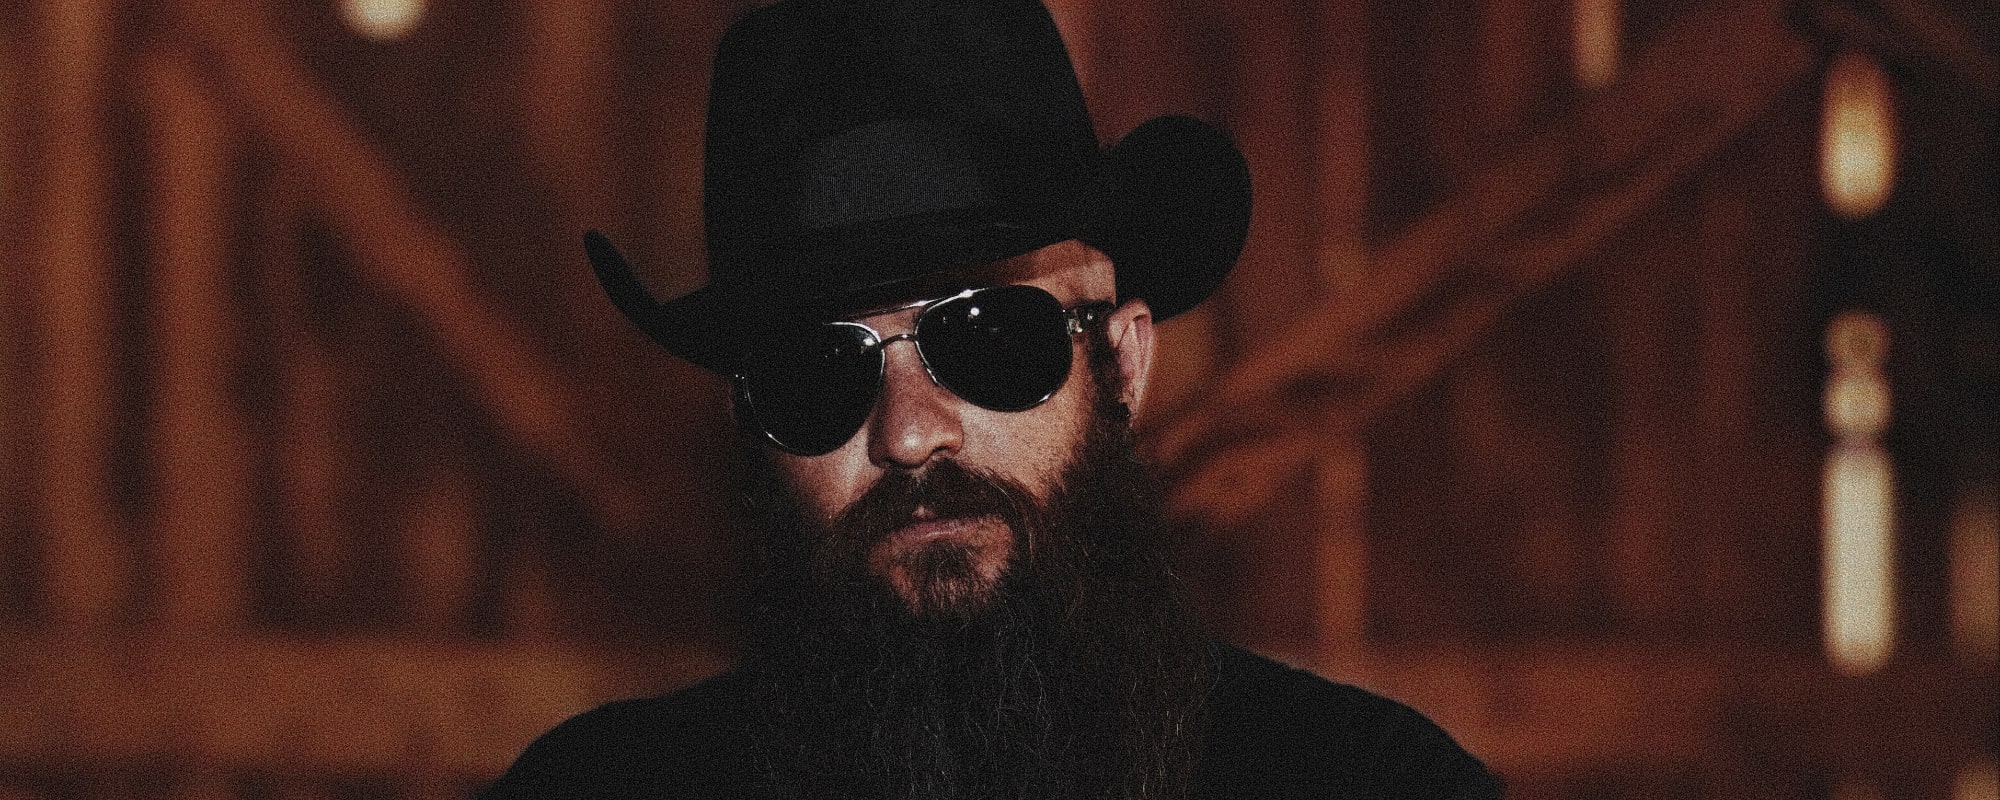 Watch Cody Jinks Cover “All My Rowdy Friends (Have Settled Down)” During New York Concert